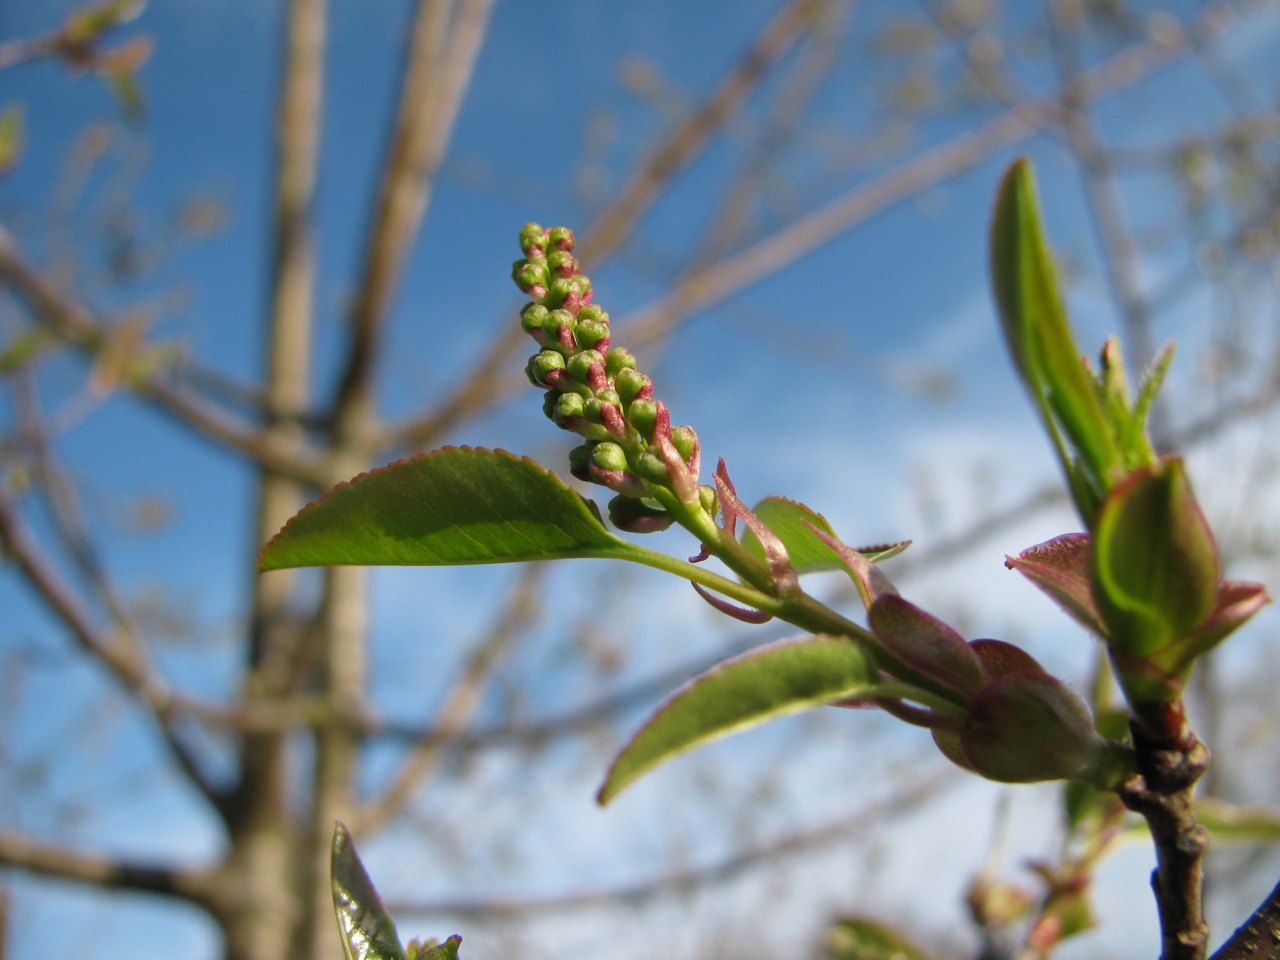 The Scientific Name is Prunus serotina var. serotina. You will likely hear them called Wild Black Cherry, Wild Cherry, Cabinet Cherry, Rum Cherry. This picture shows the Developing raceme and leaves emerging in early spring of Prunus serotina var. serotina